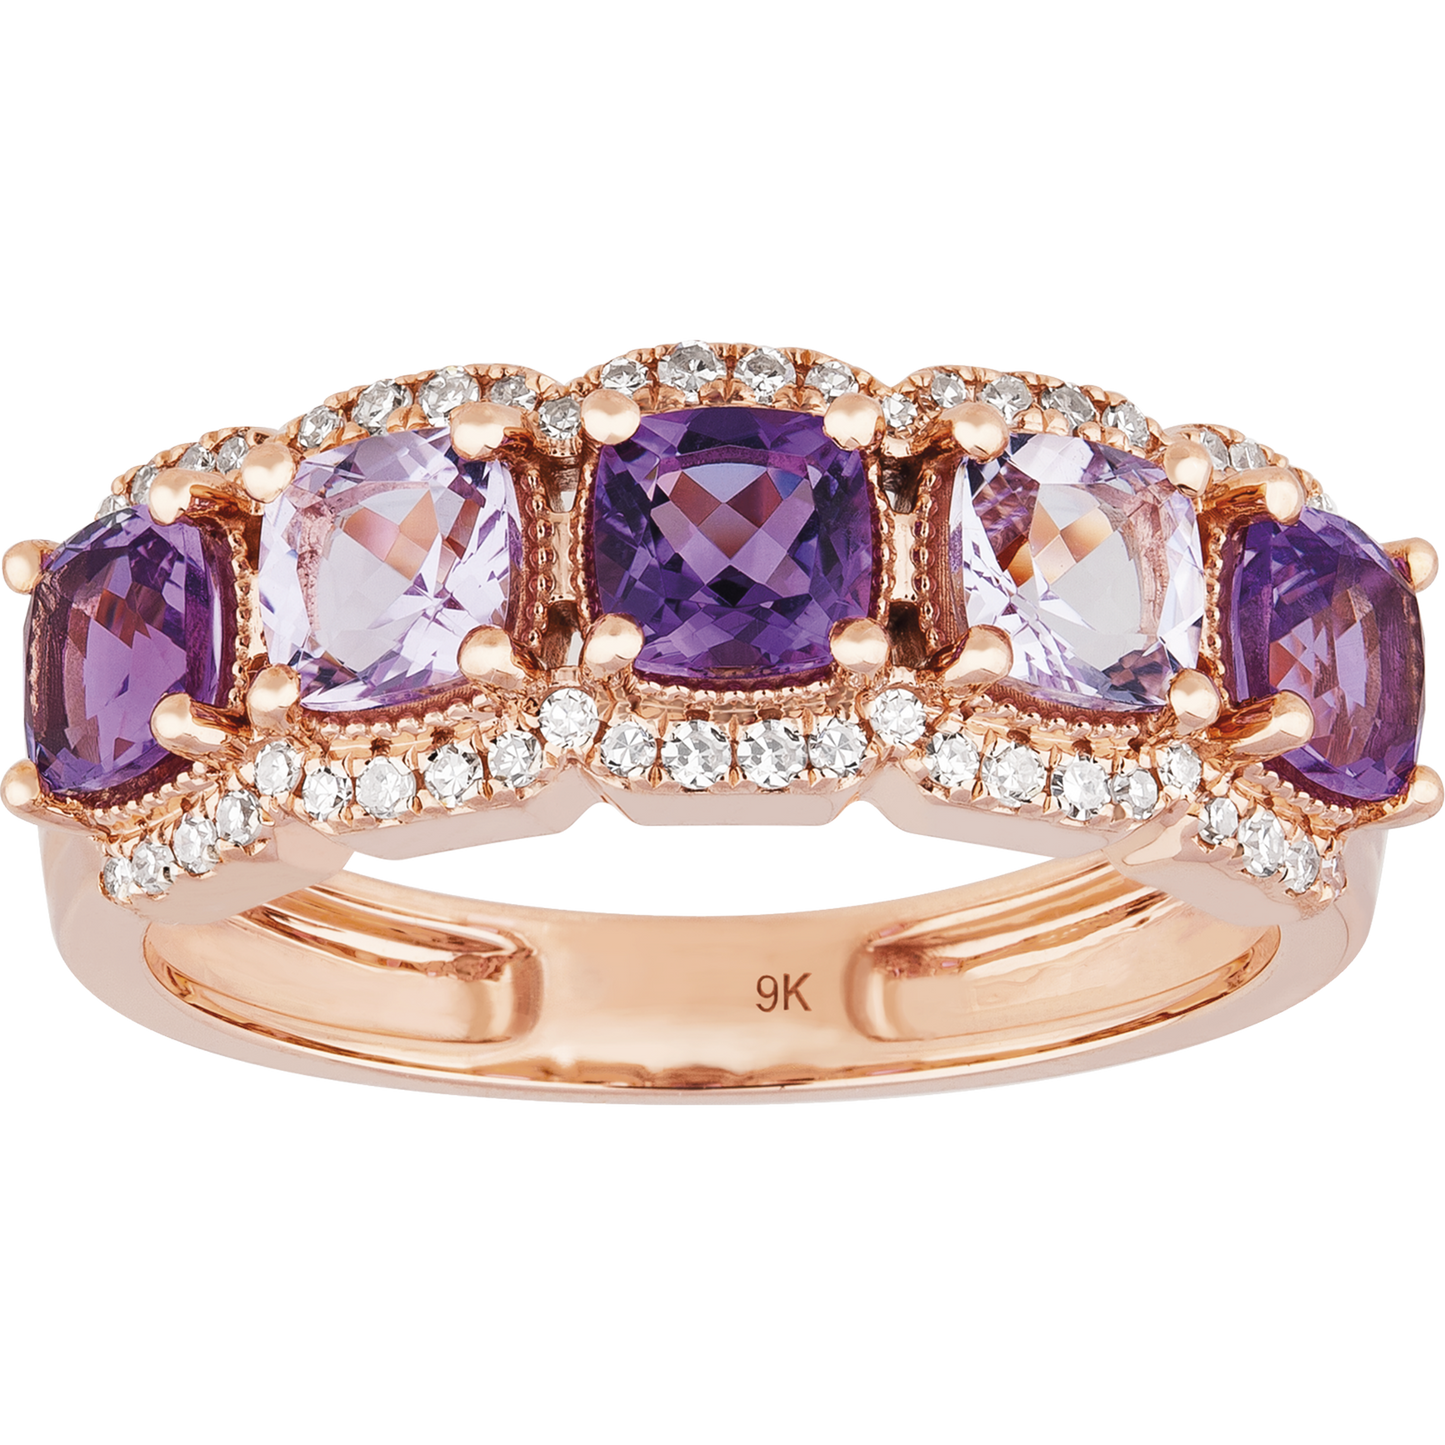 3.70ct Amethyst Princess Cut and 0.16ct Diamond Ring in 9ct Rose Gold.